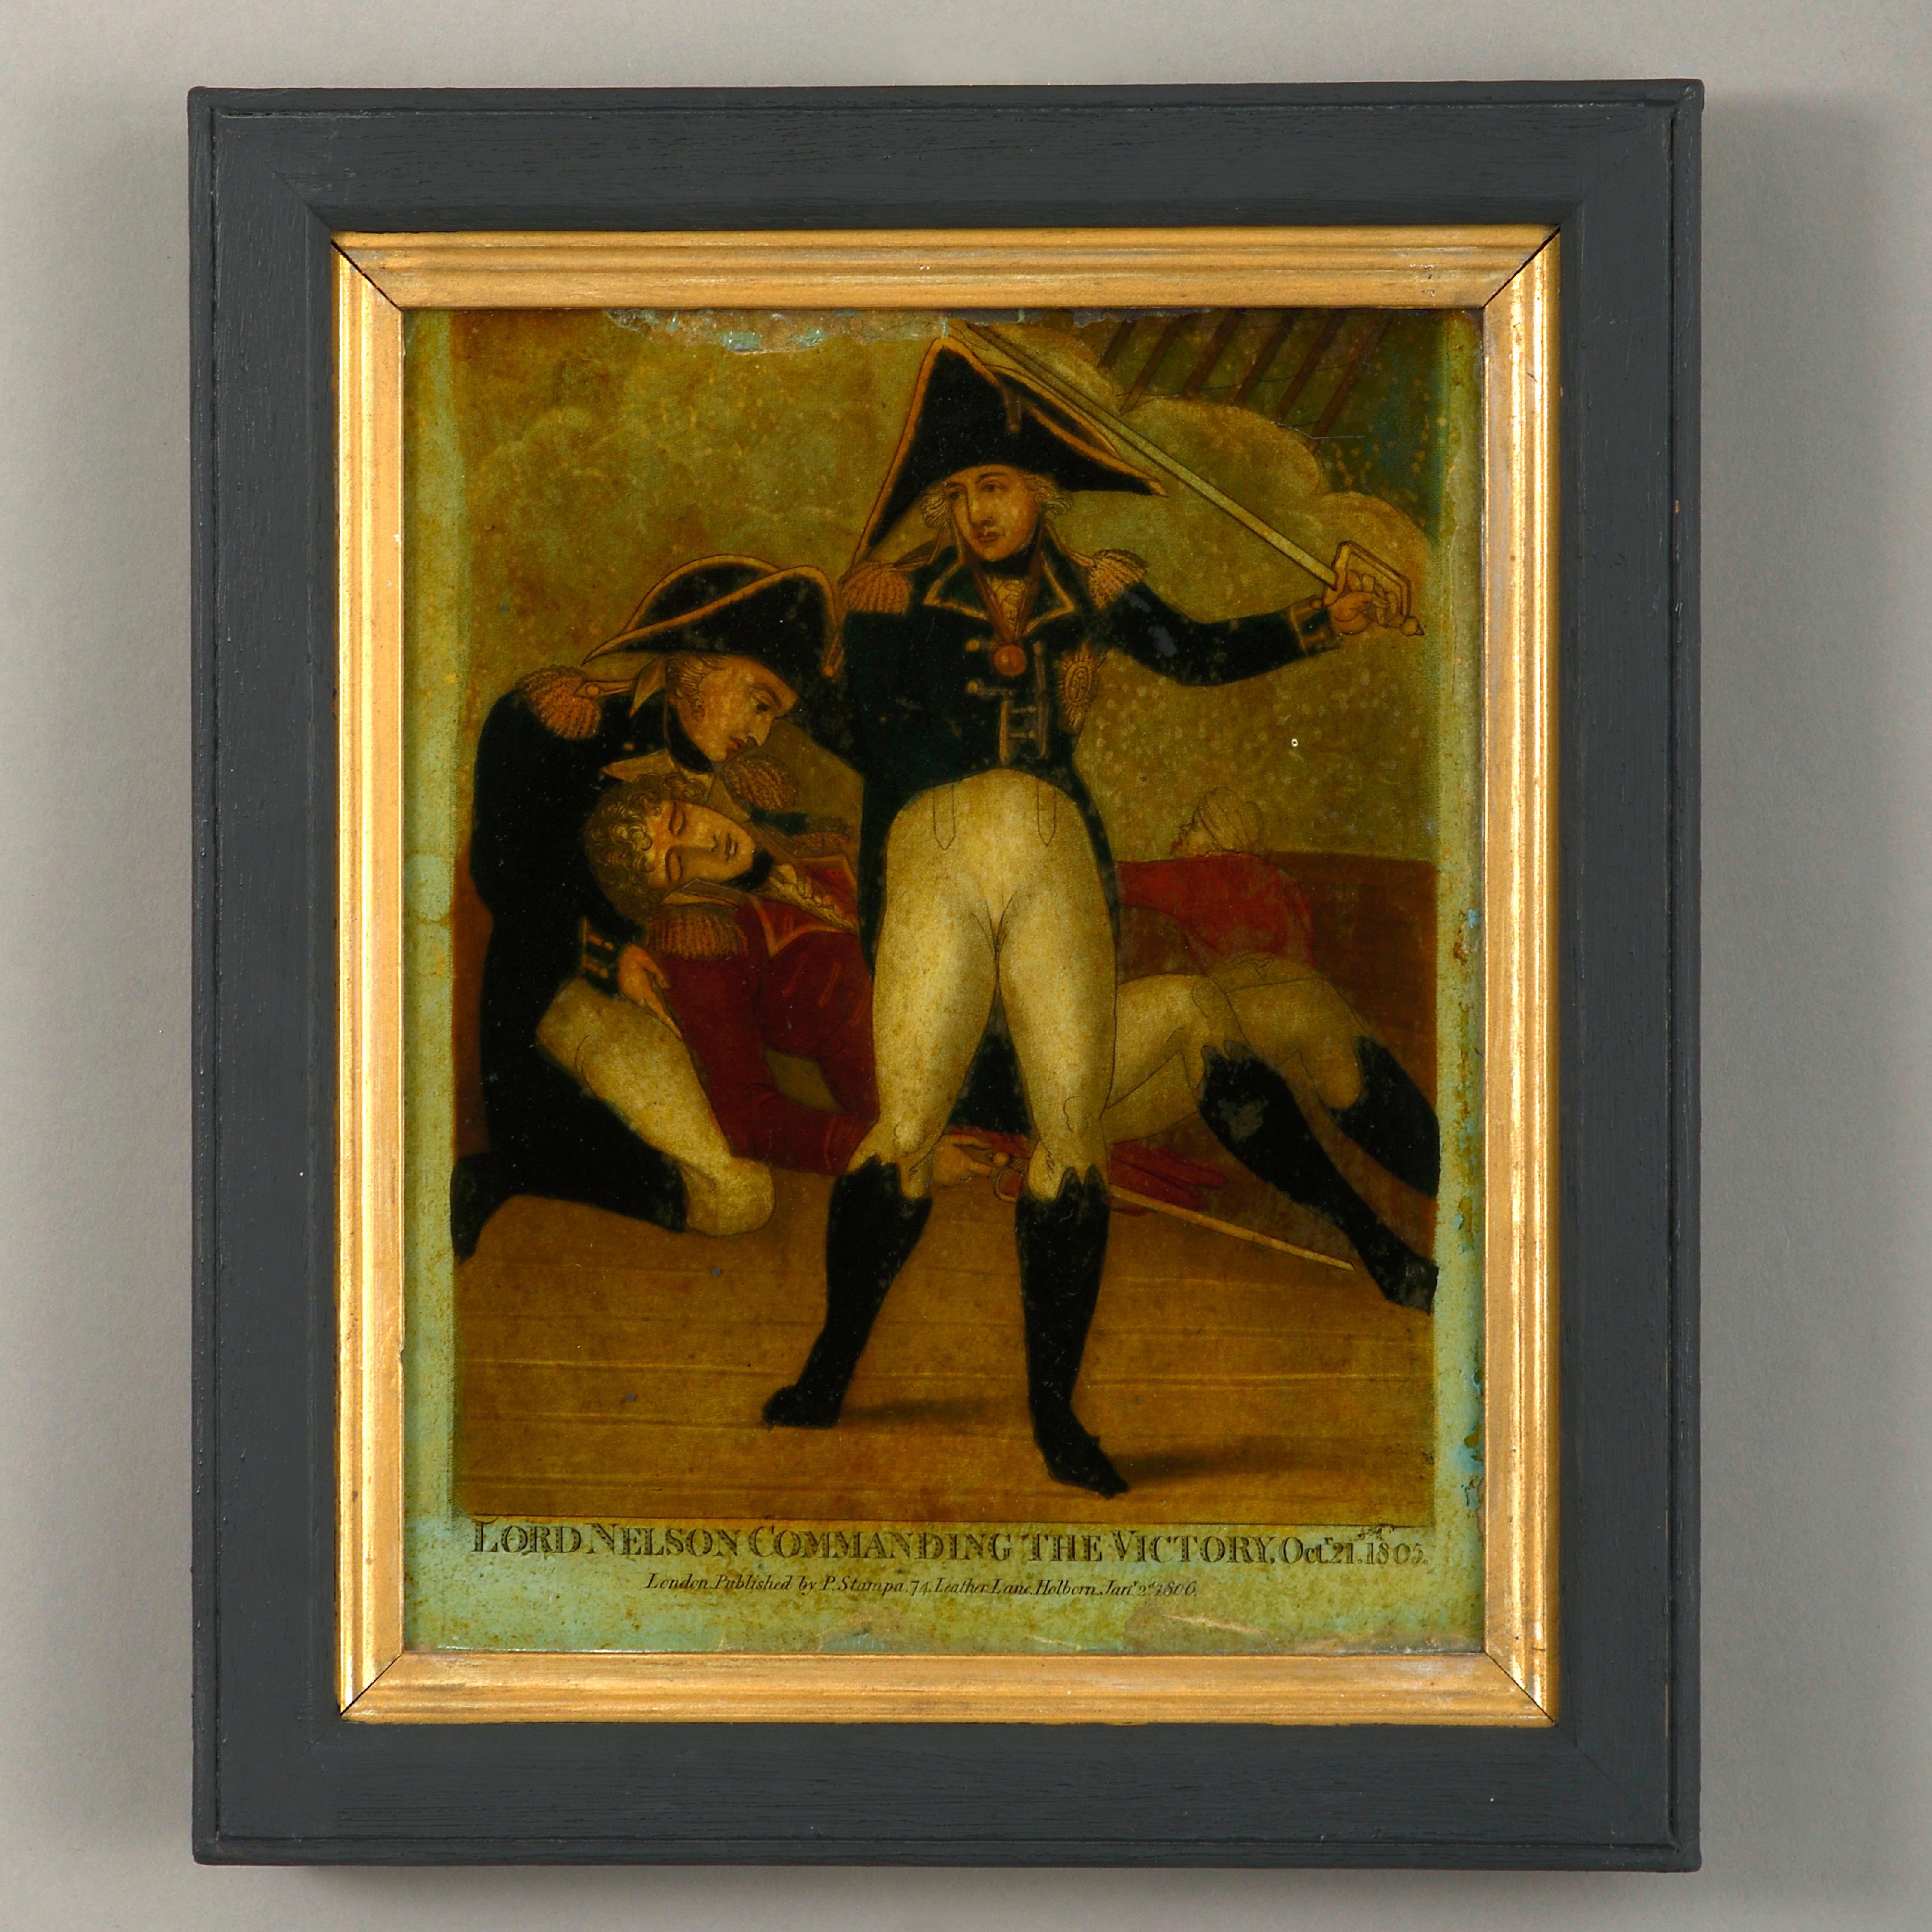 A 19th Century Reverse Glass Print Depicting Lord Nelson Commanding The Victory